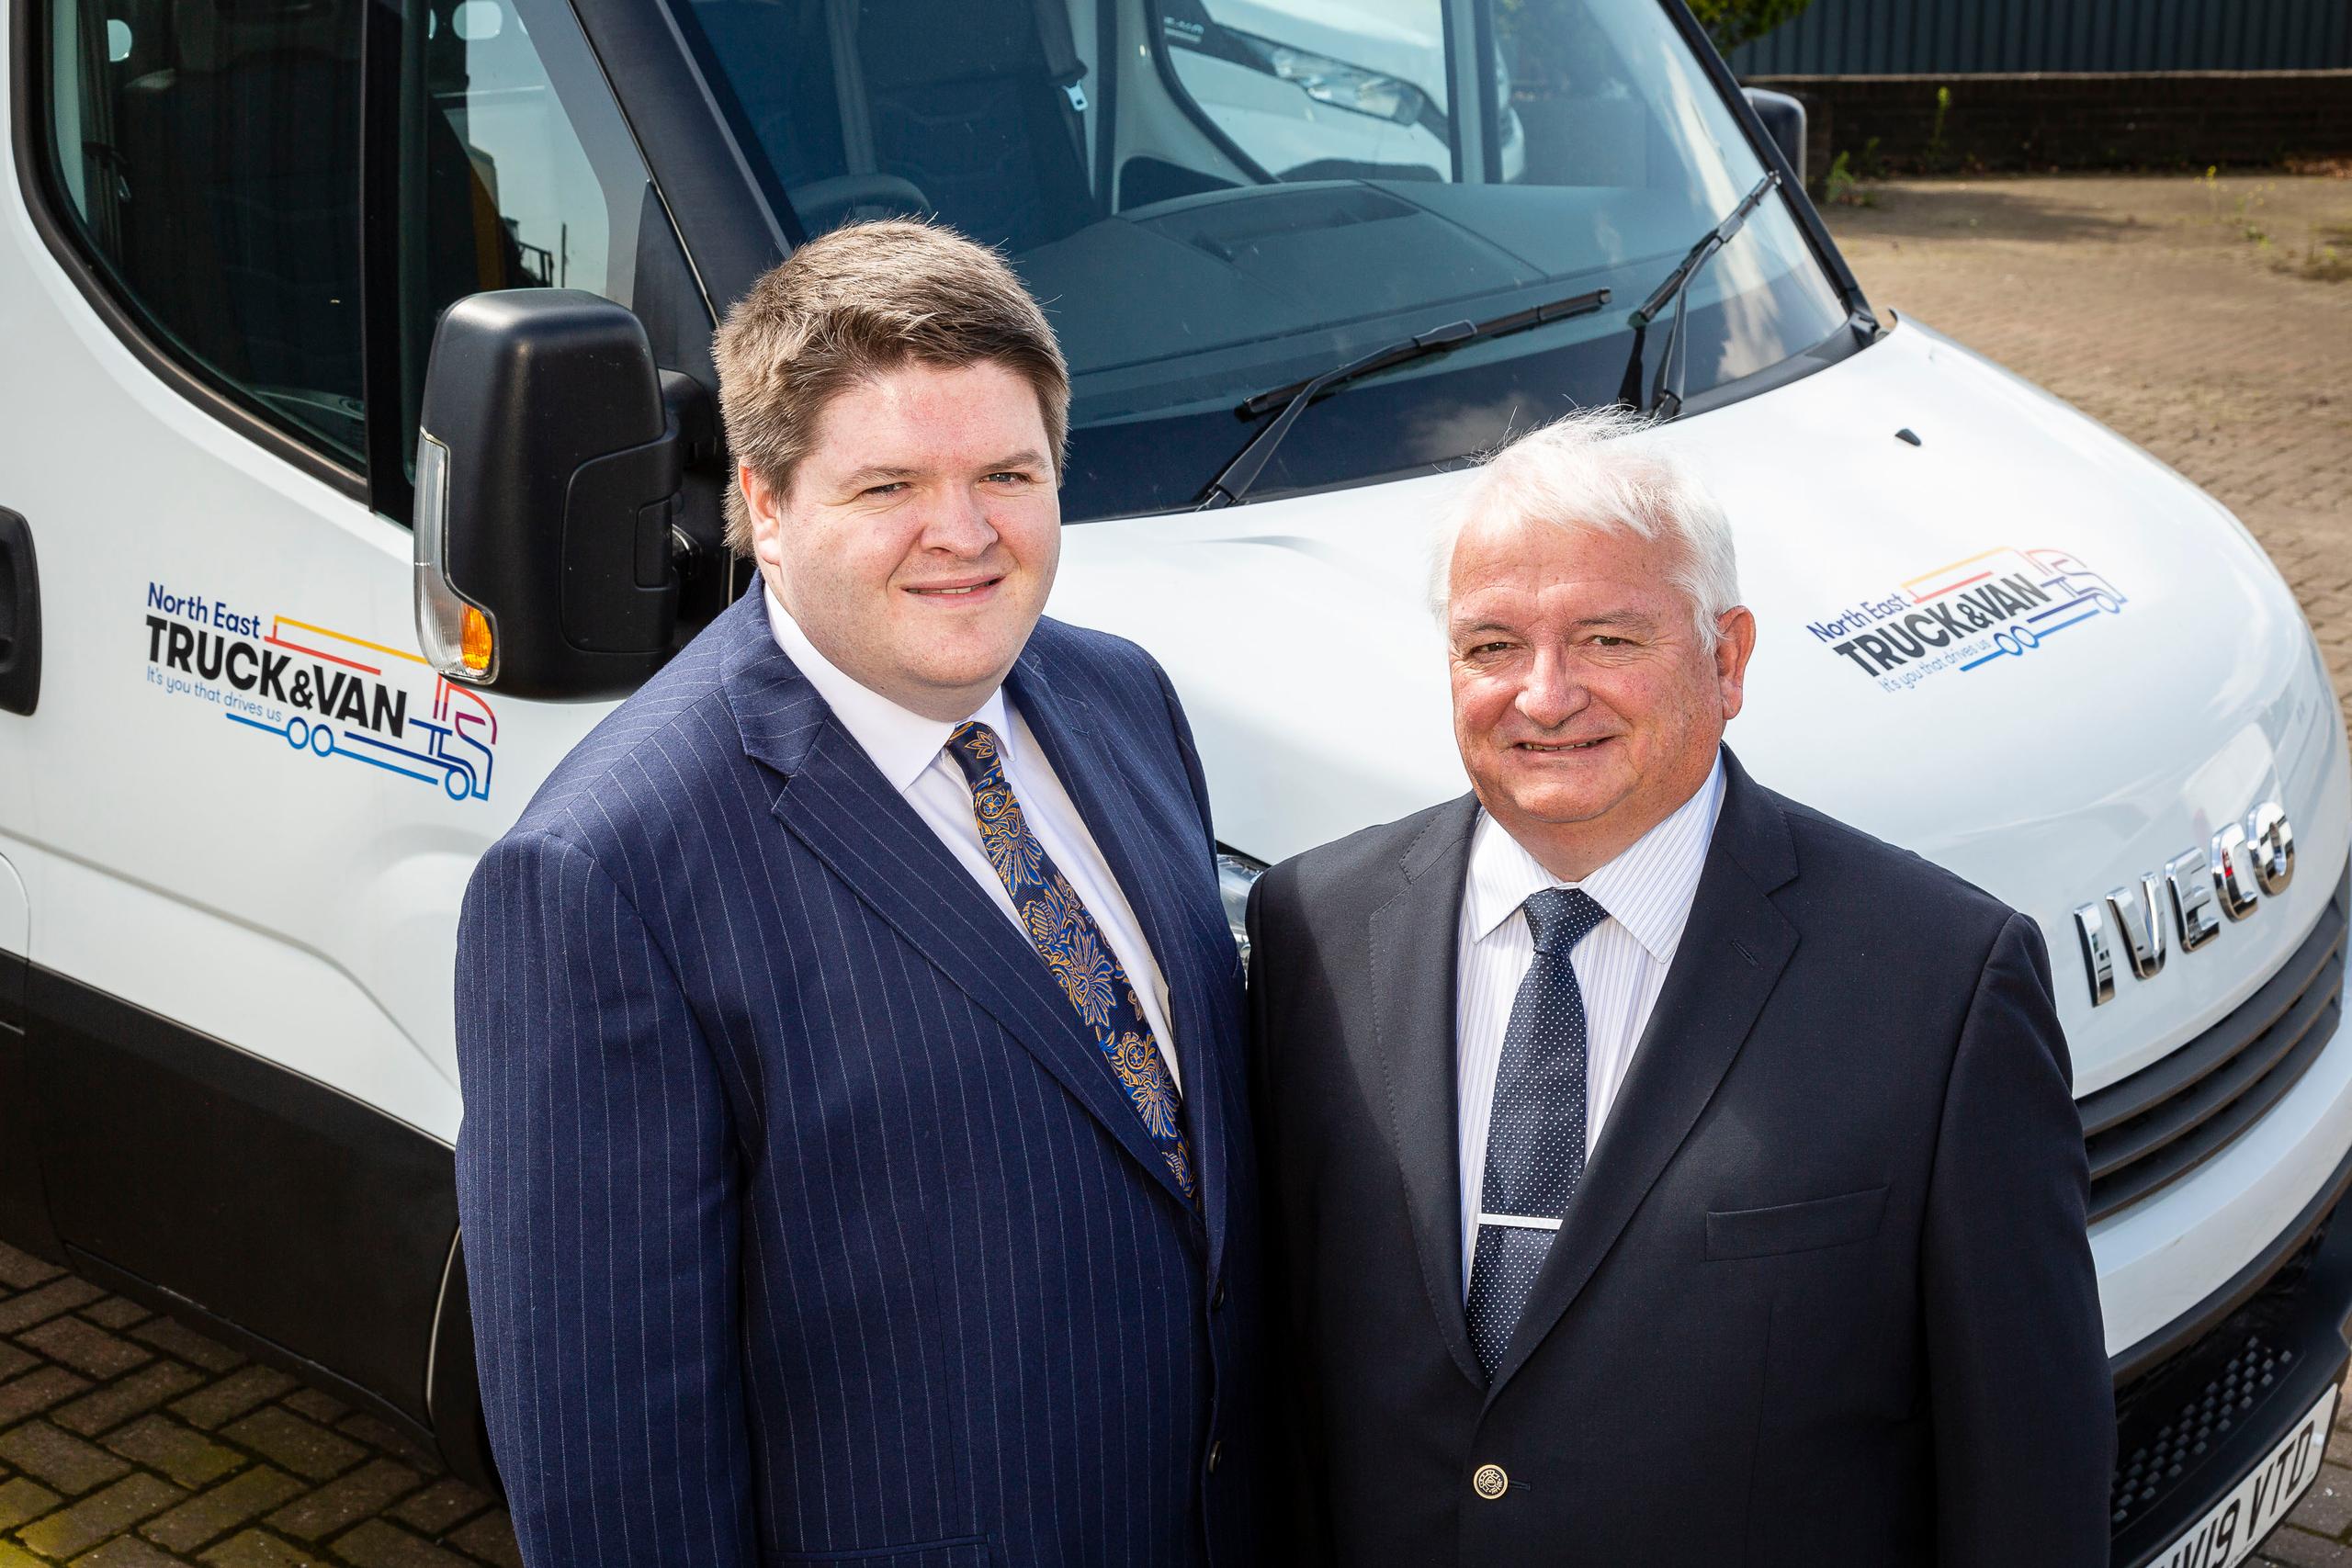 New Managing Director appointed at North East Truck & Van